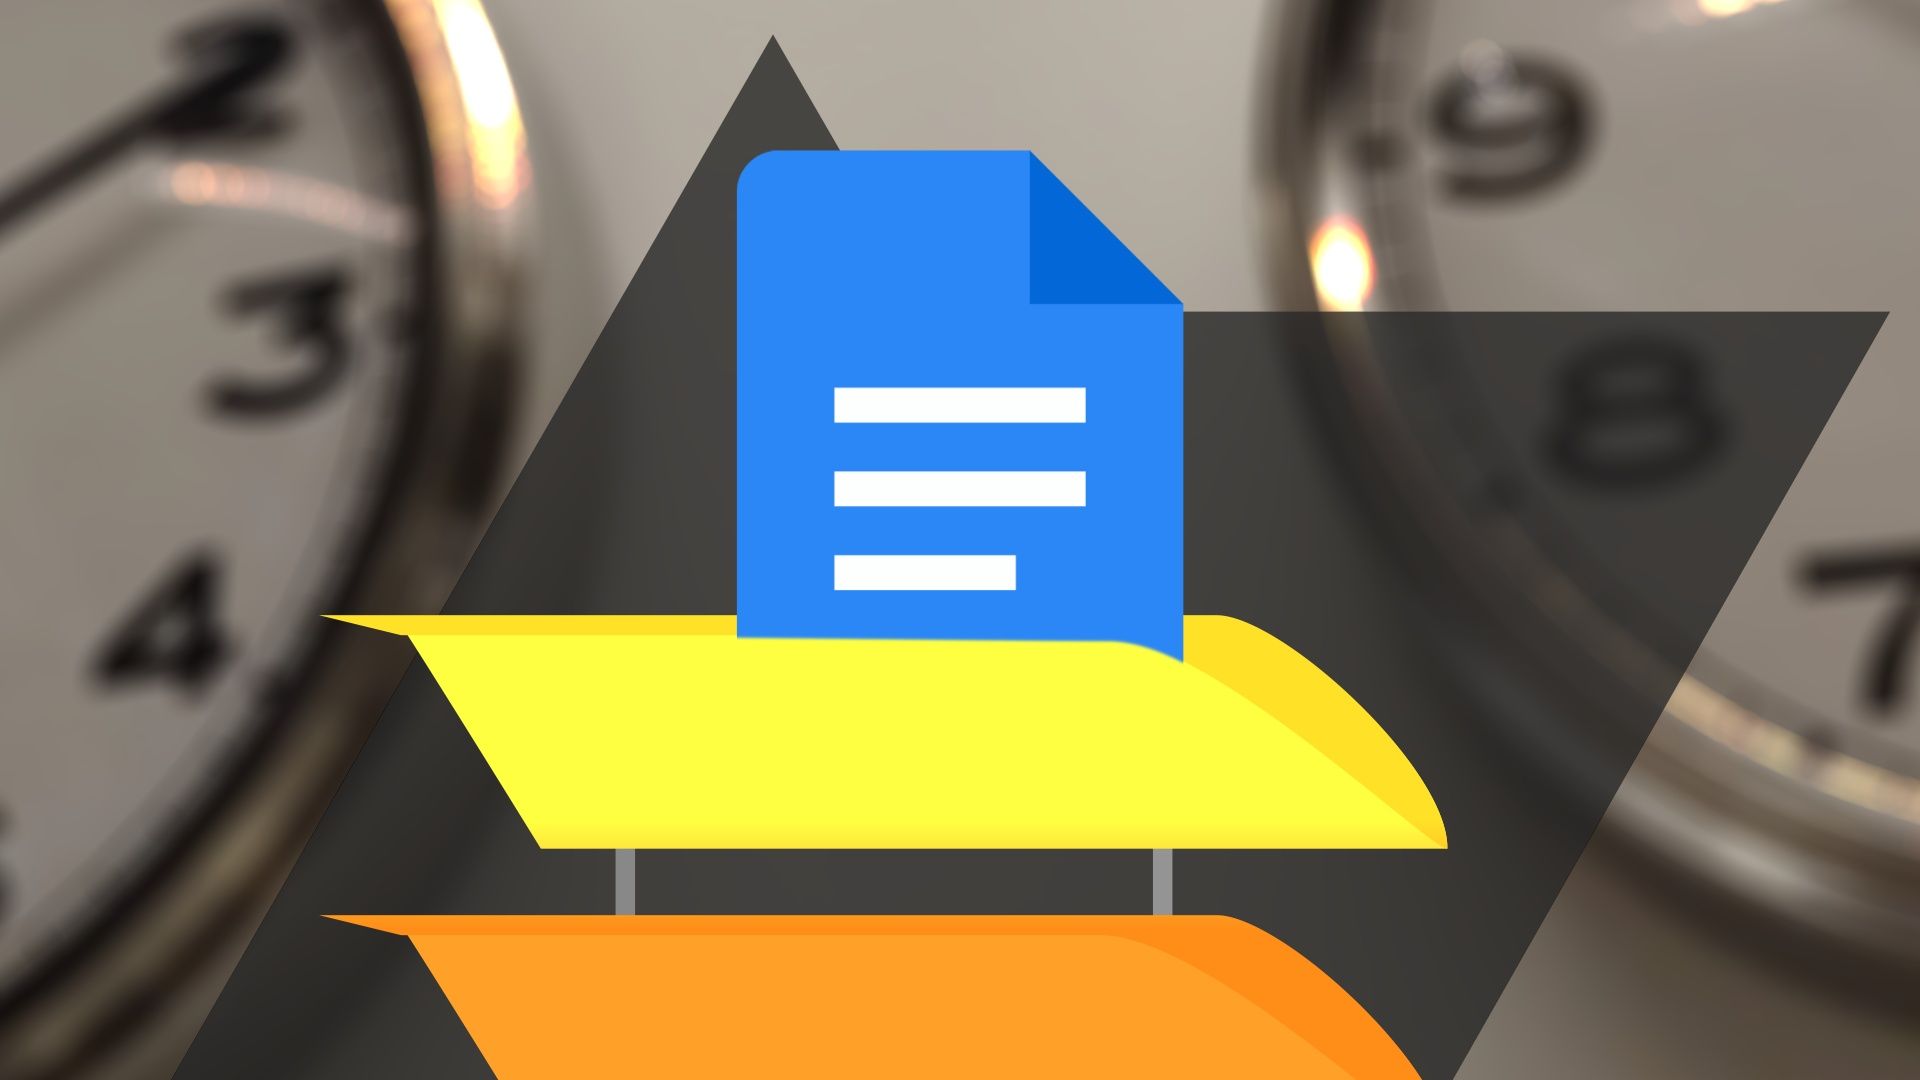 The Google Docs icon sitting in an inbox with clocks in the background.